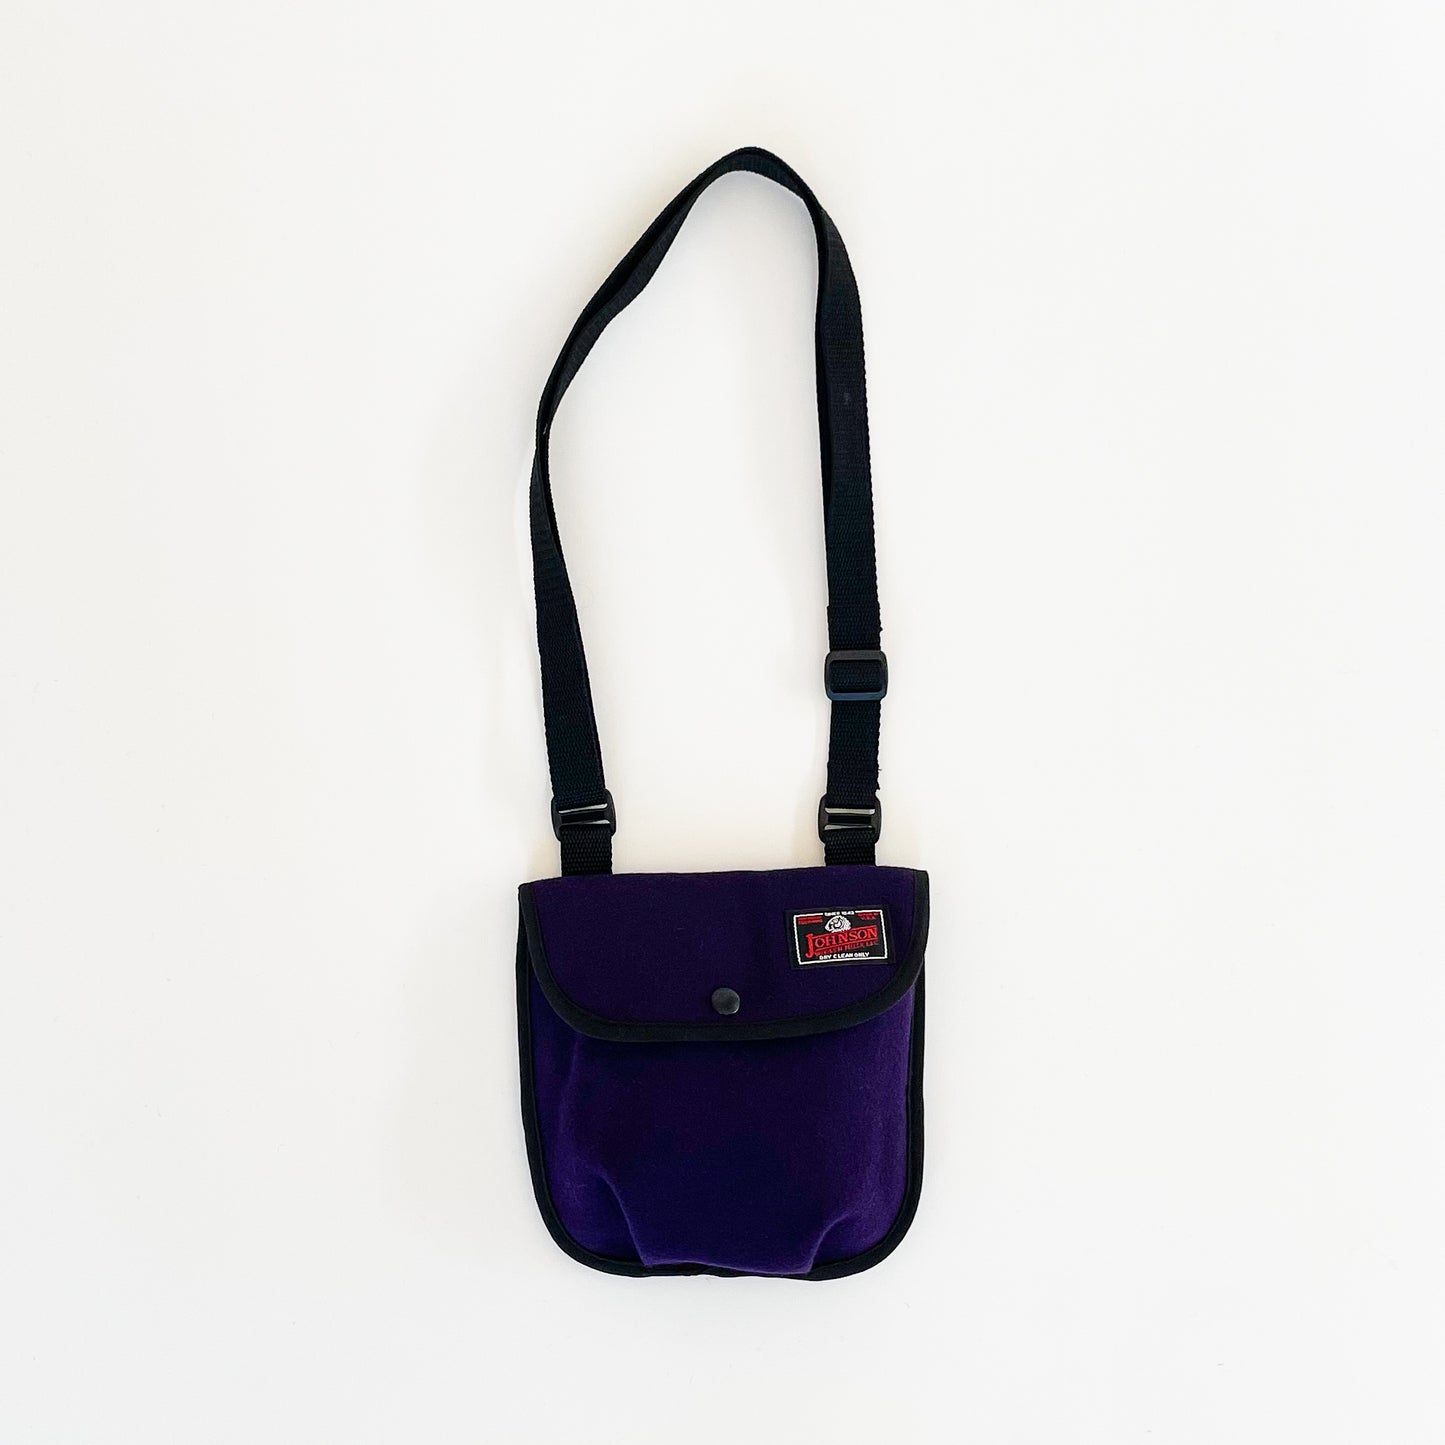 Wool swing back - black powder pouch with added shoulder strap.  Shown in purple.